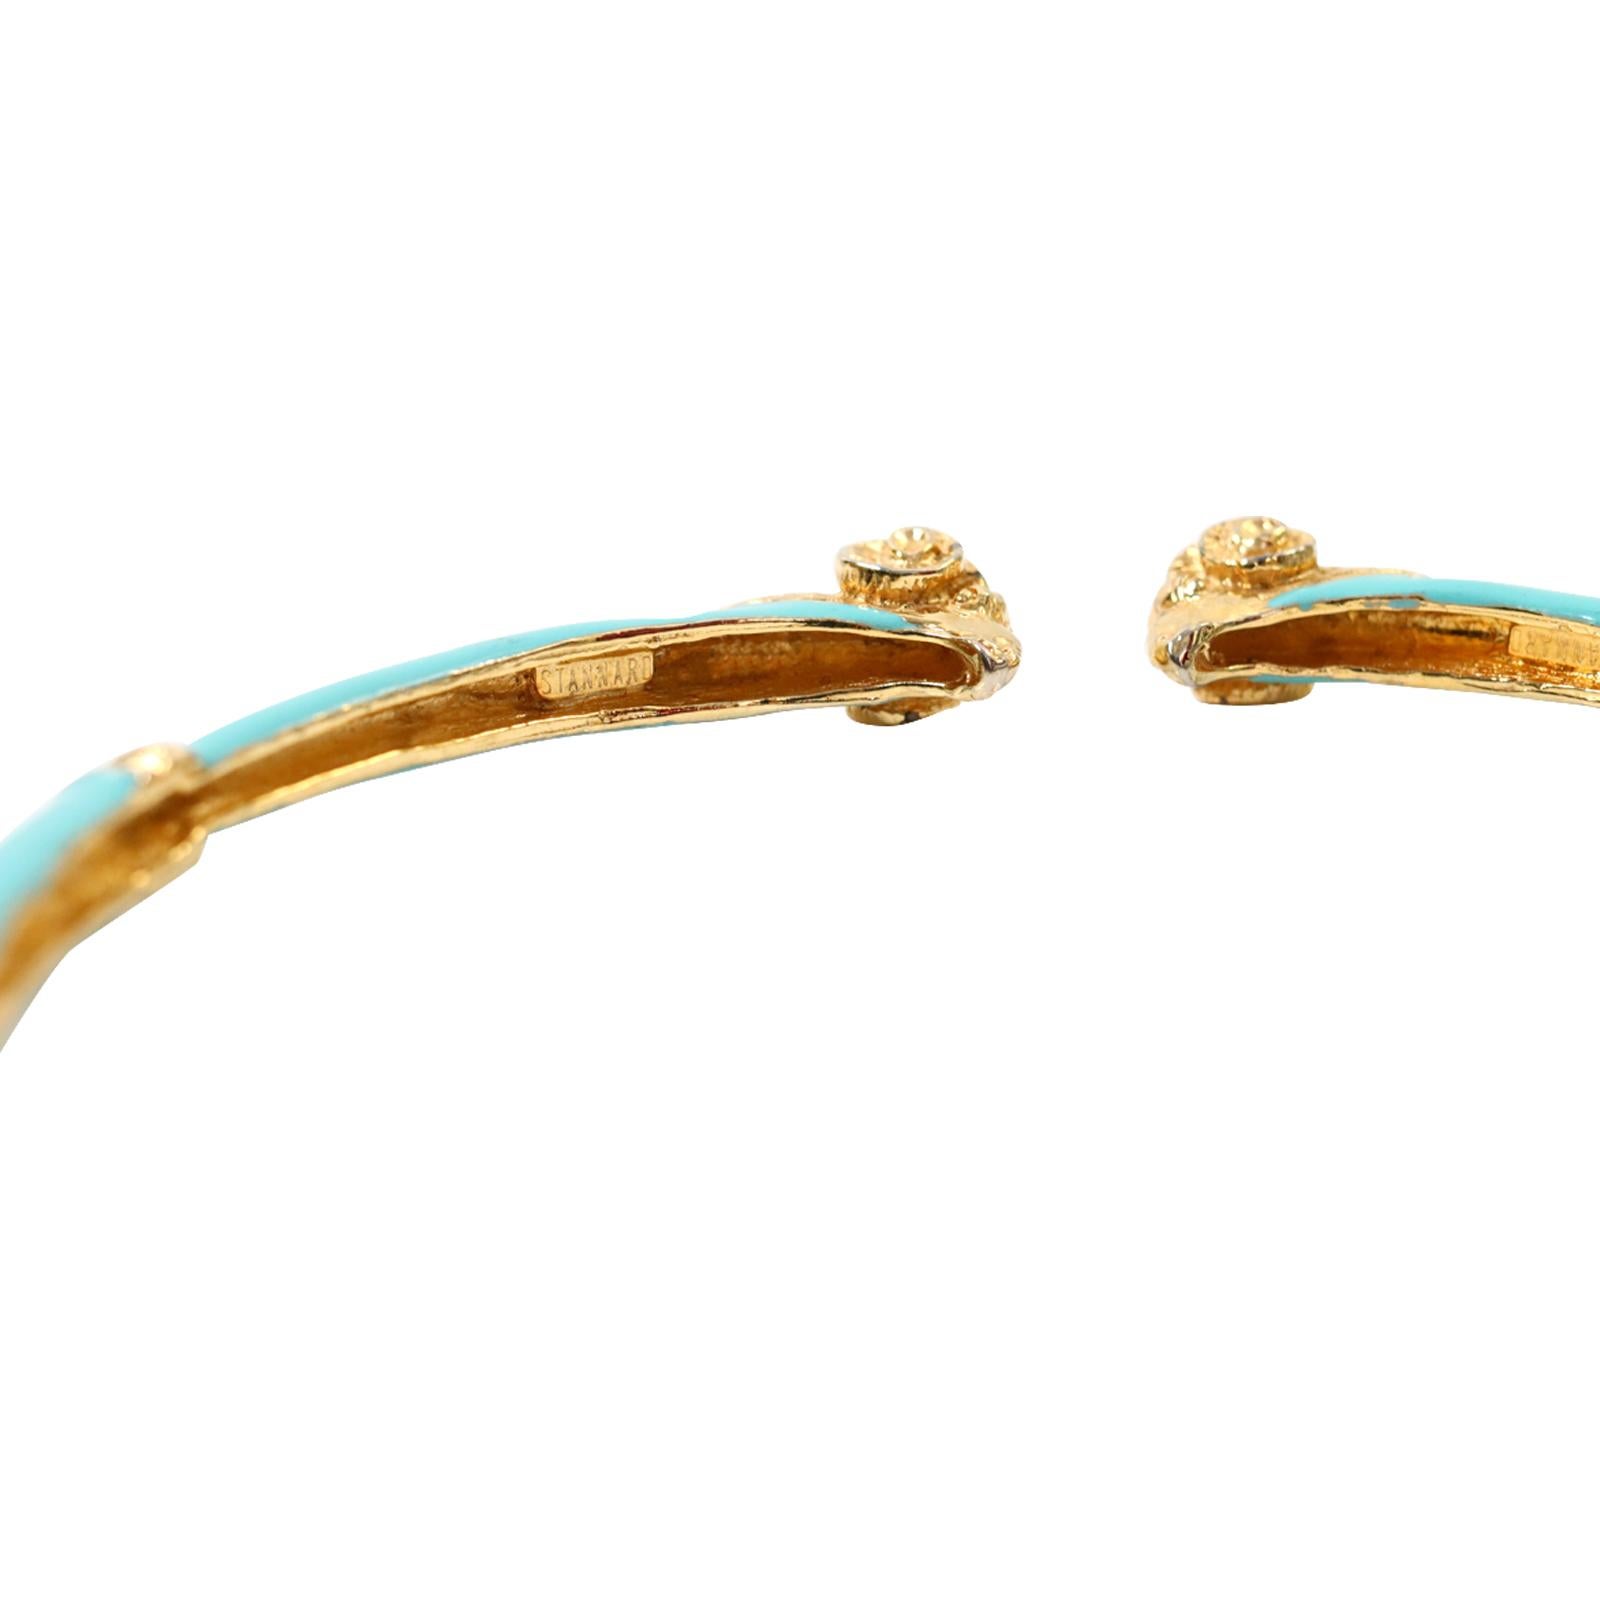 Vintage Donald Stannard Rams Head Choker in Turquoise and Gold Circa 1980s 3